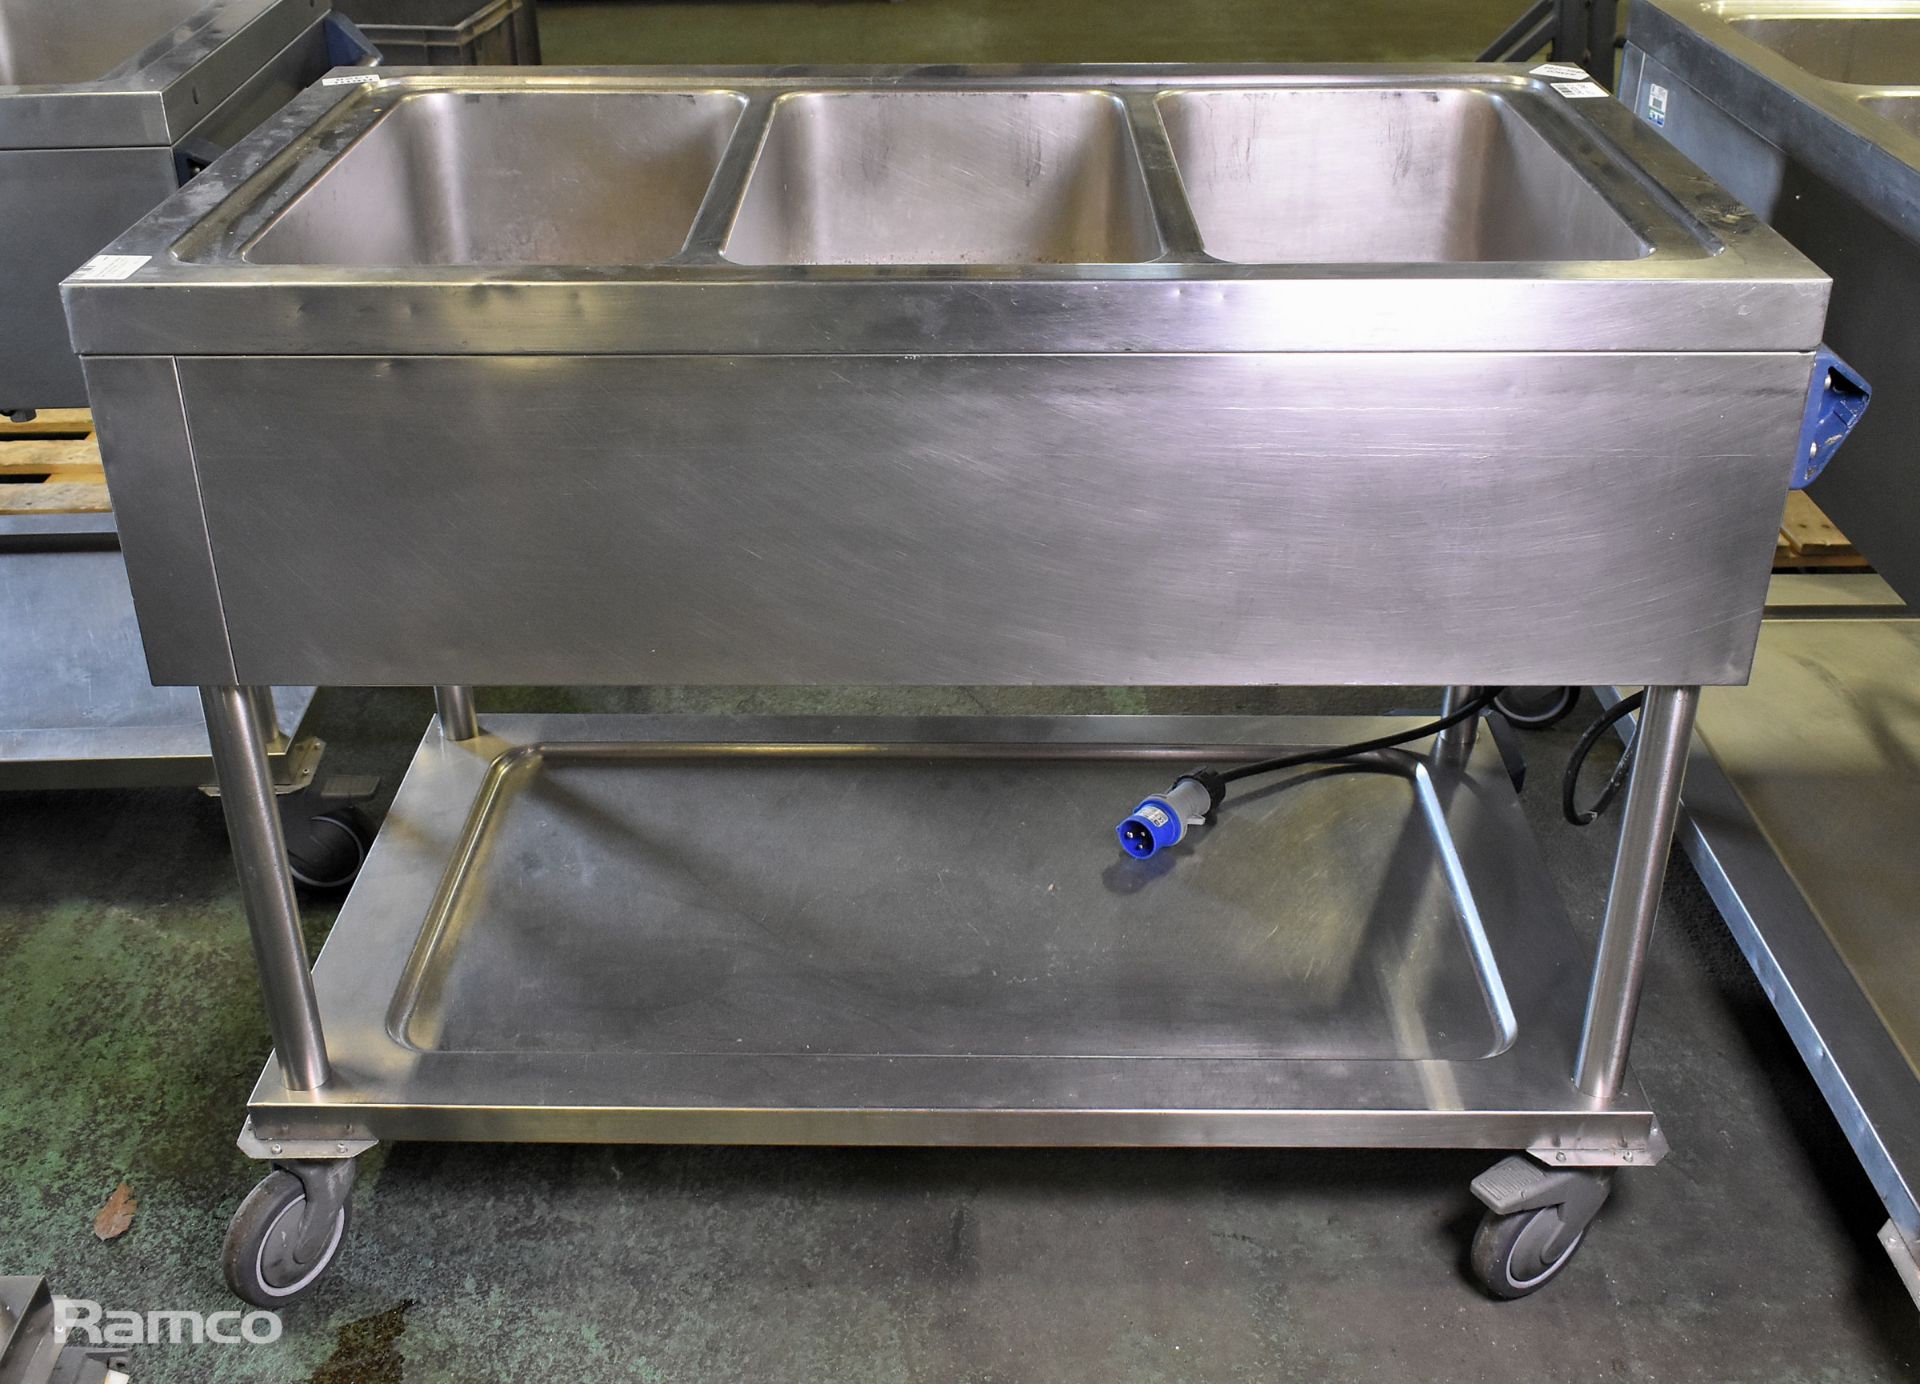 Stainless steel water heated bain-marie trolley - L 1160 x W 640 x H 920mm - Image 4 of 7